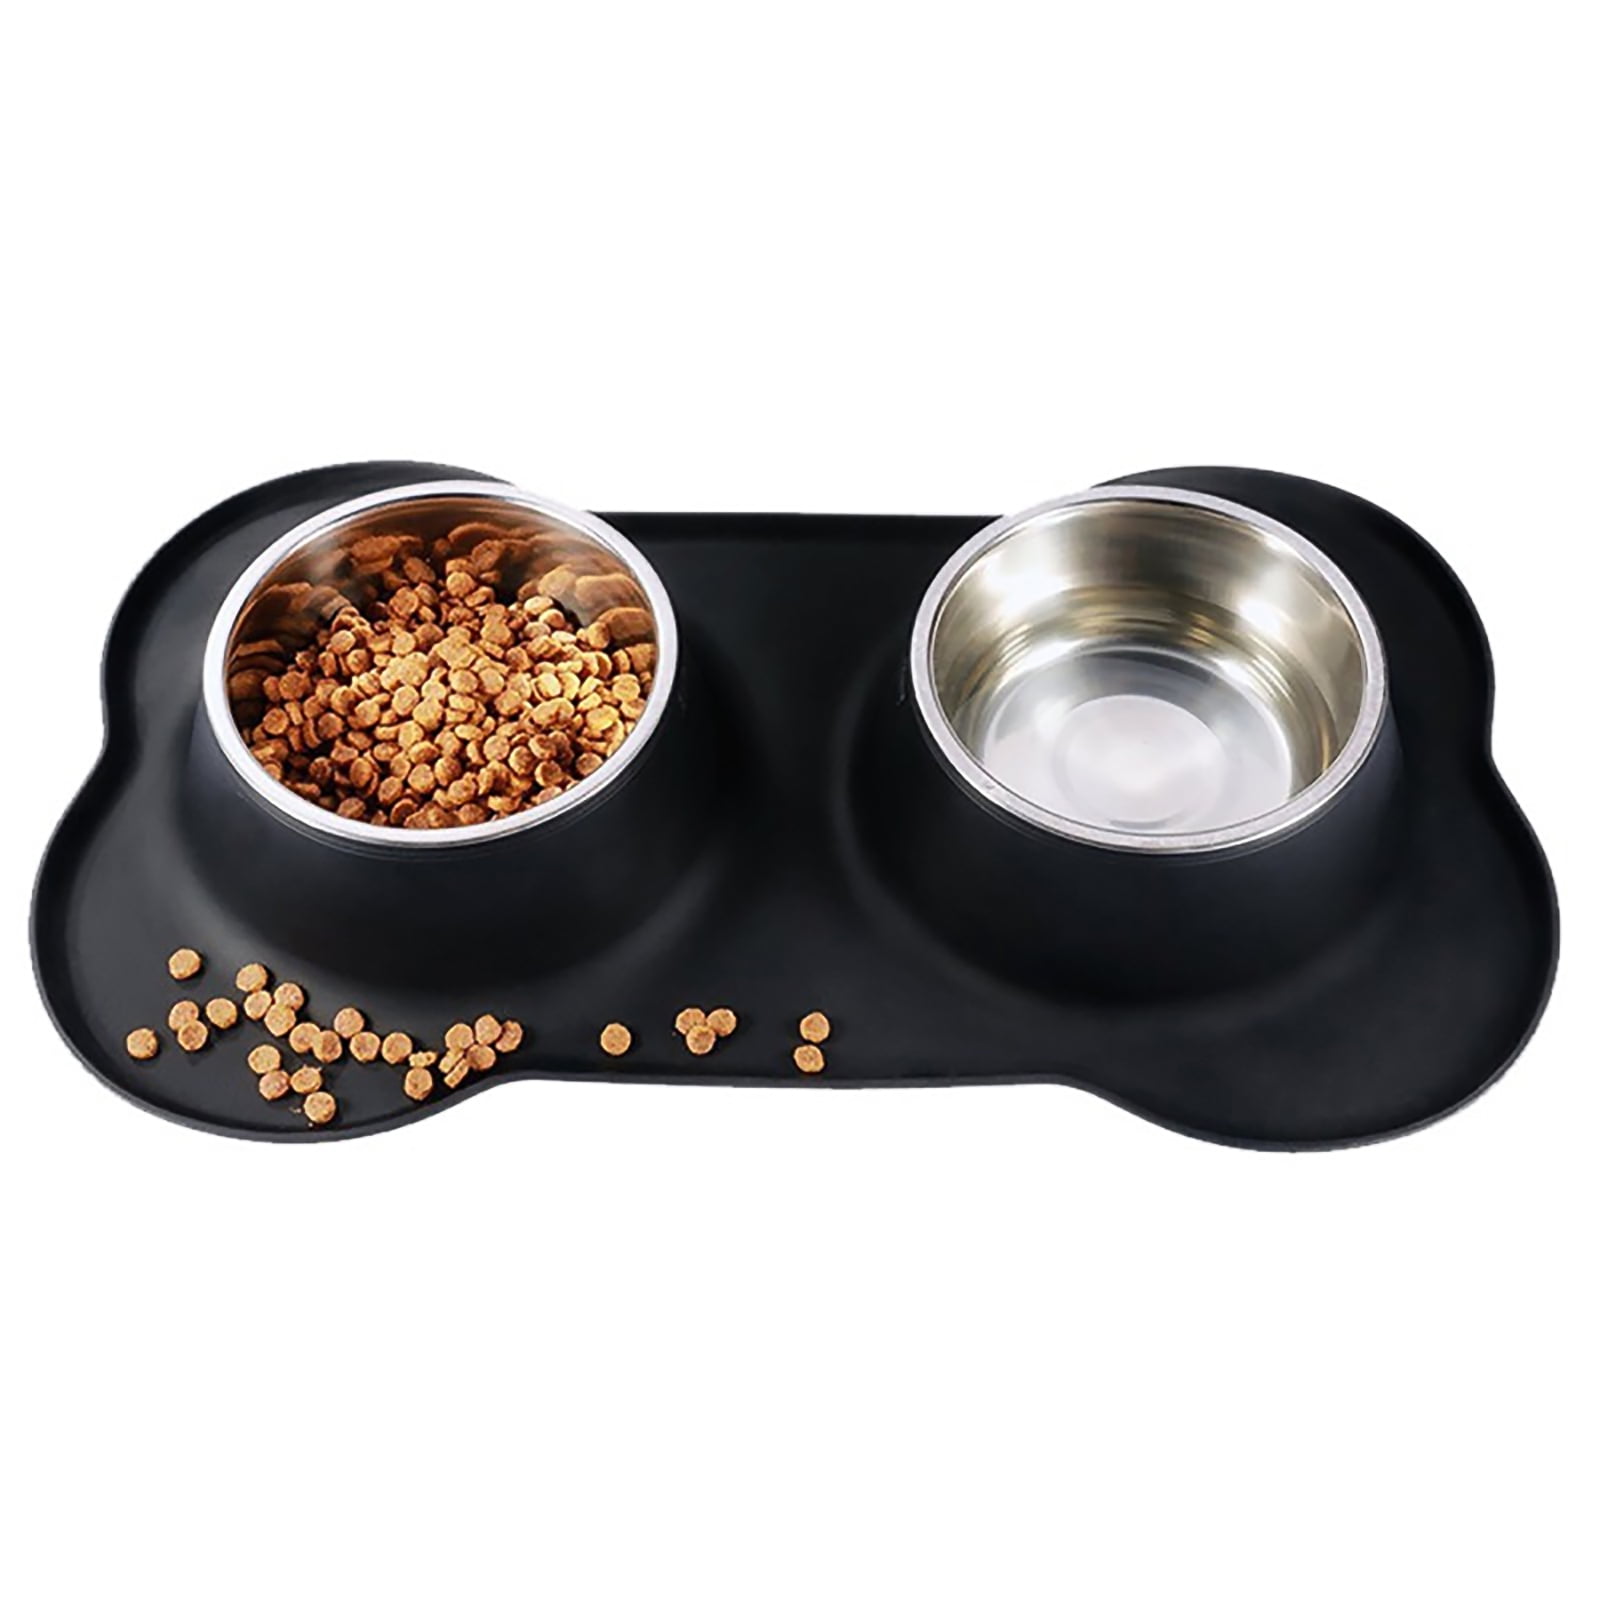 Mikicharm Dog Food Bowls, New Stainless Steel Spill-Proof Dog Bowl, Raised  Dog Bowl Stand 2 Dog Food Bowls for Food and Water Double, Feeder